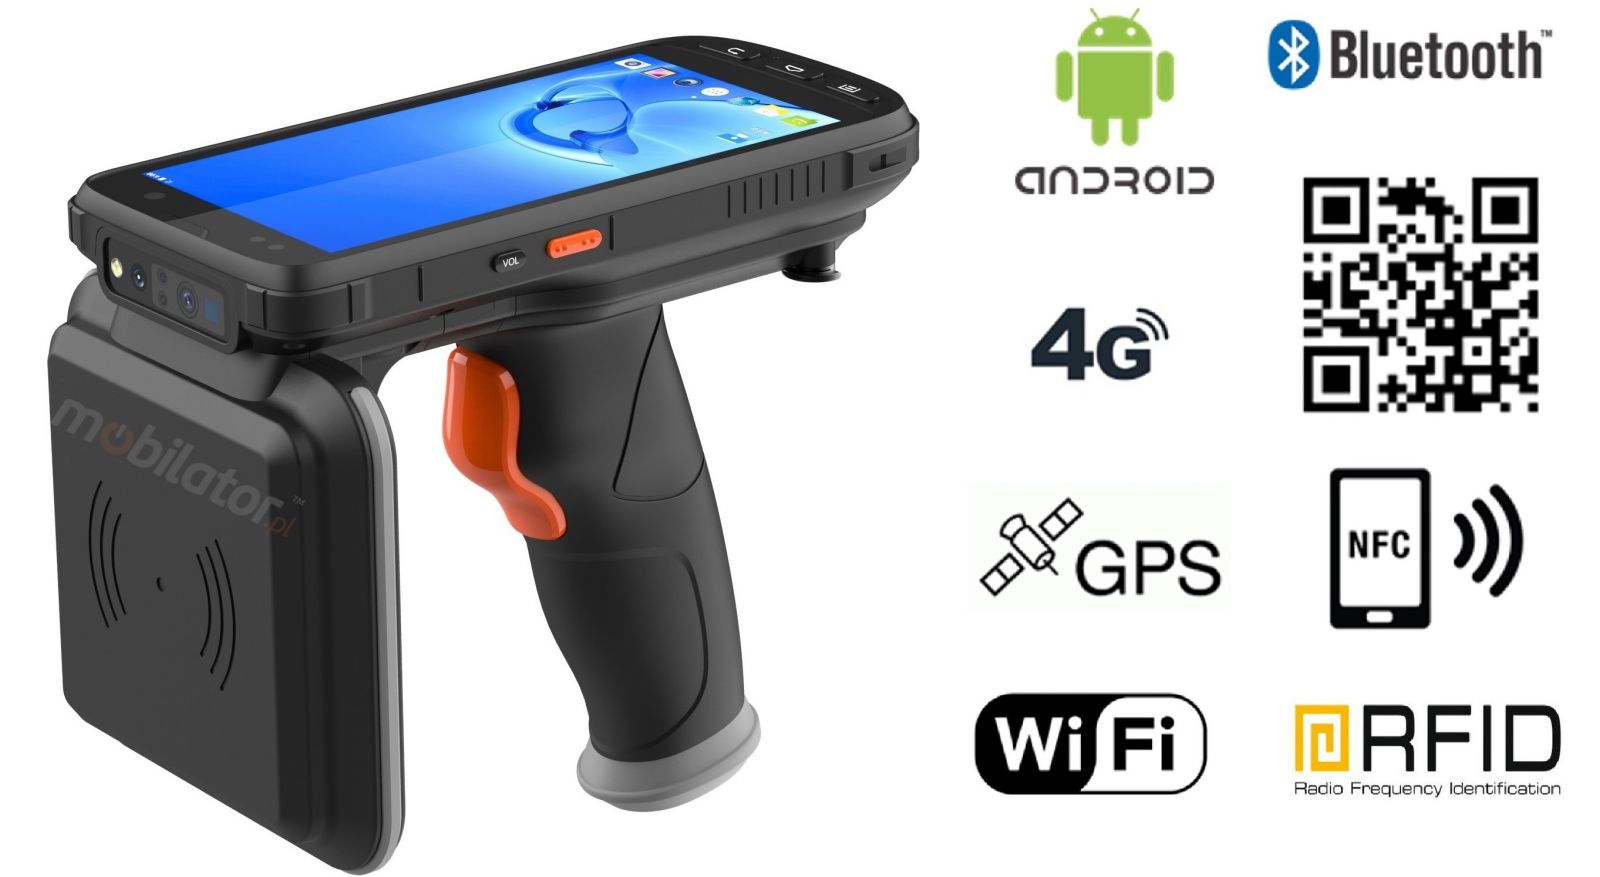 MobiPad XX-B6 v.8 - Industrial data collector with a pistol grip and a 2D code scanner (Mindeo ME5600) and NFC + 4G LTE + Bluetooth + WiFi + UHF 18m 